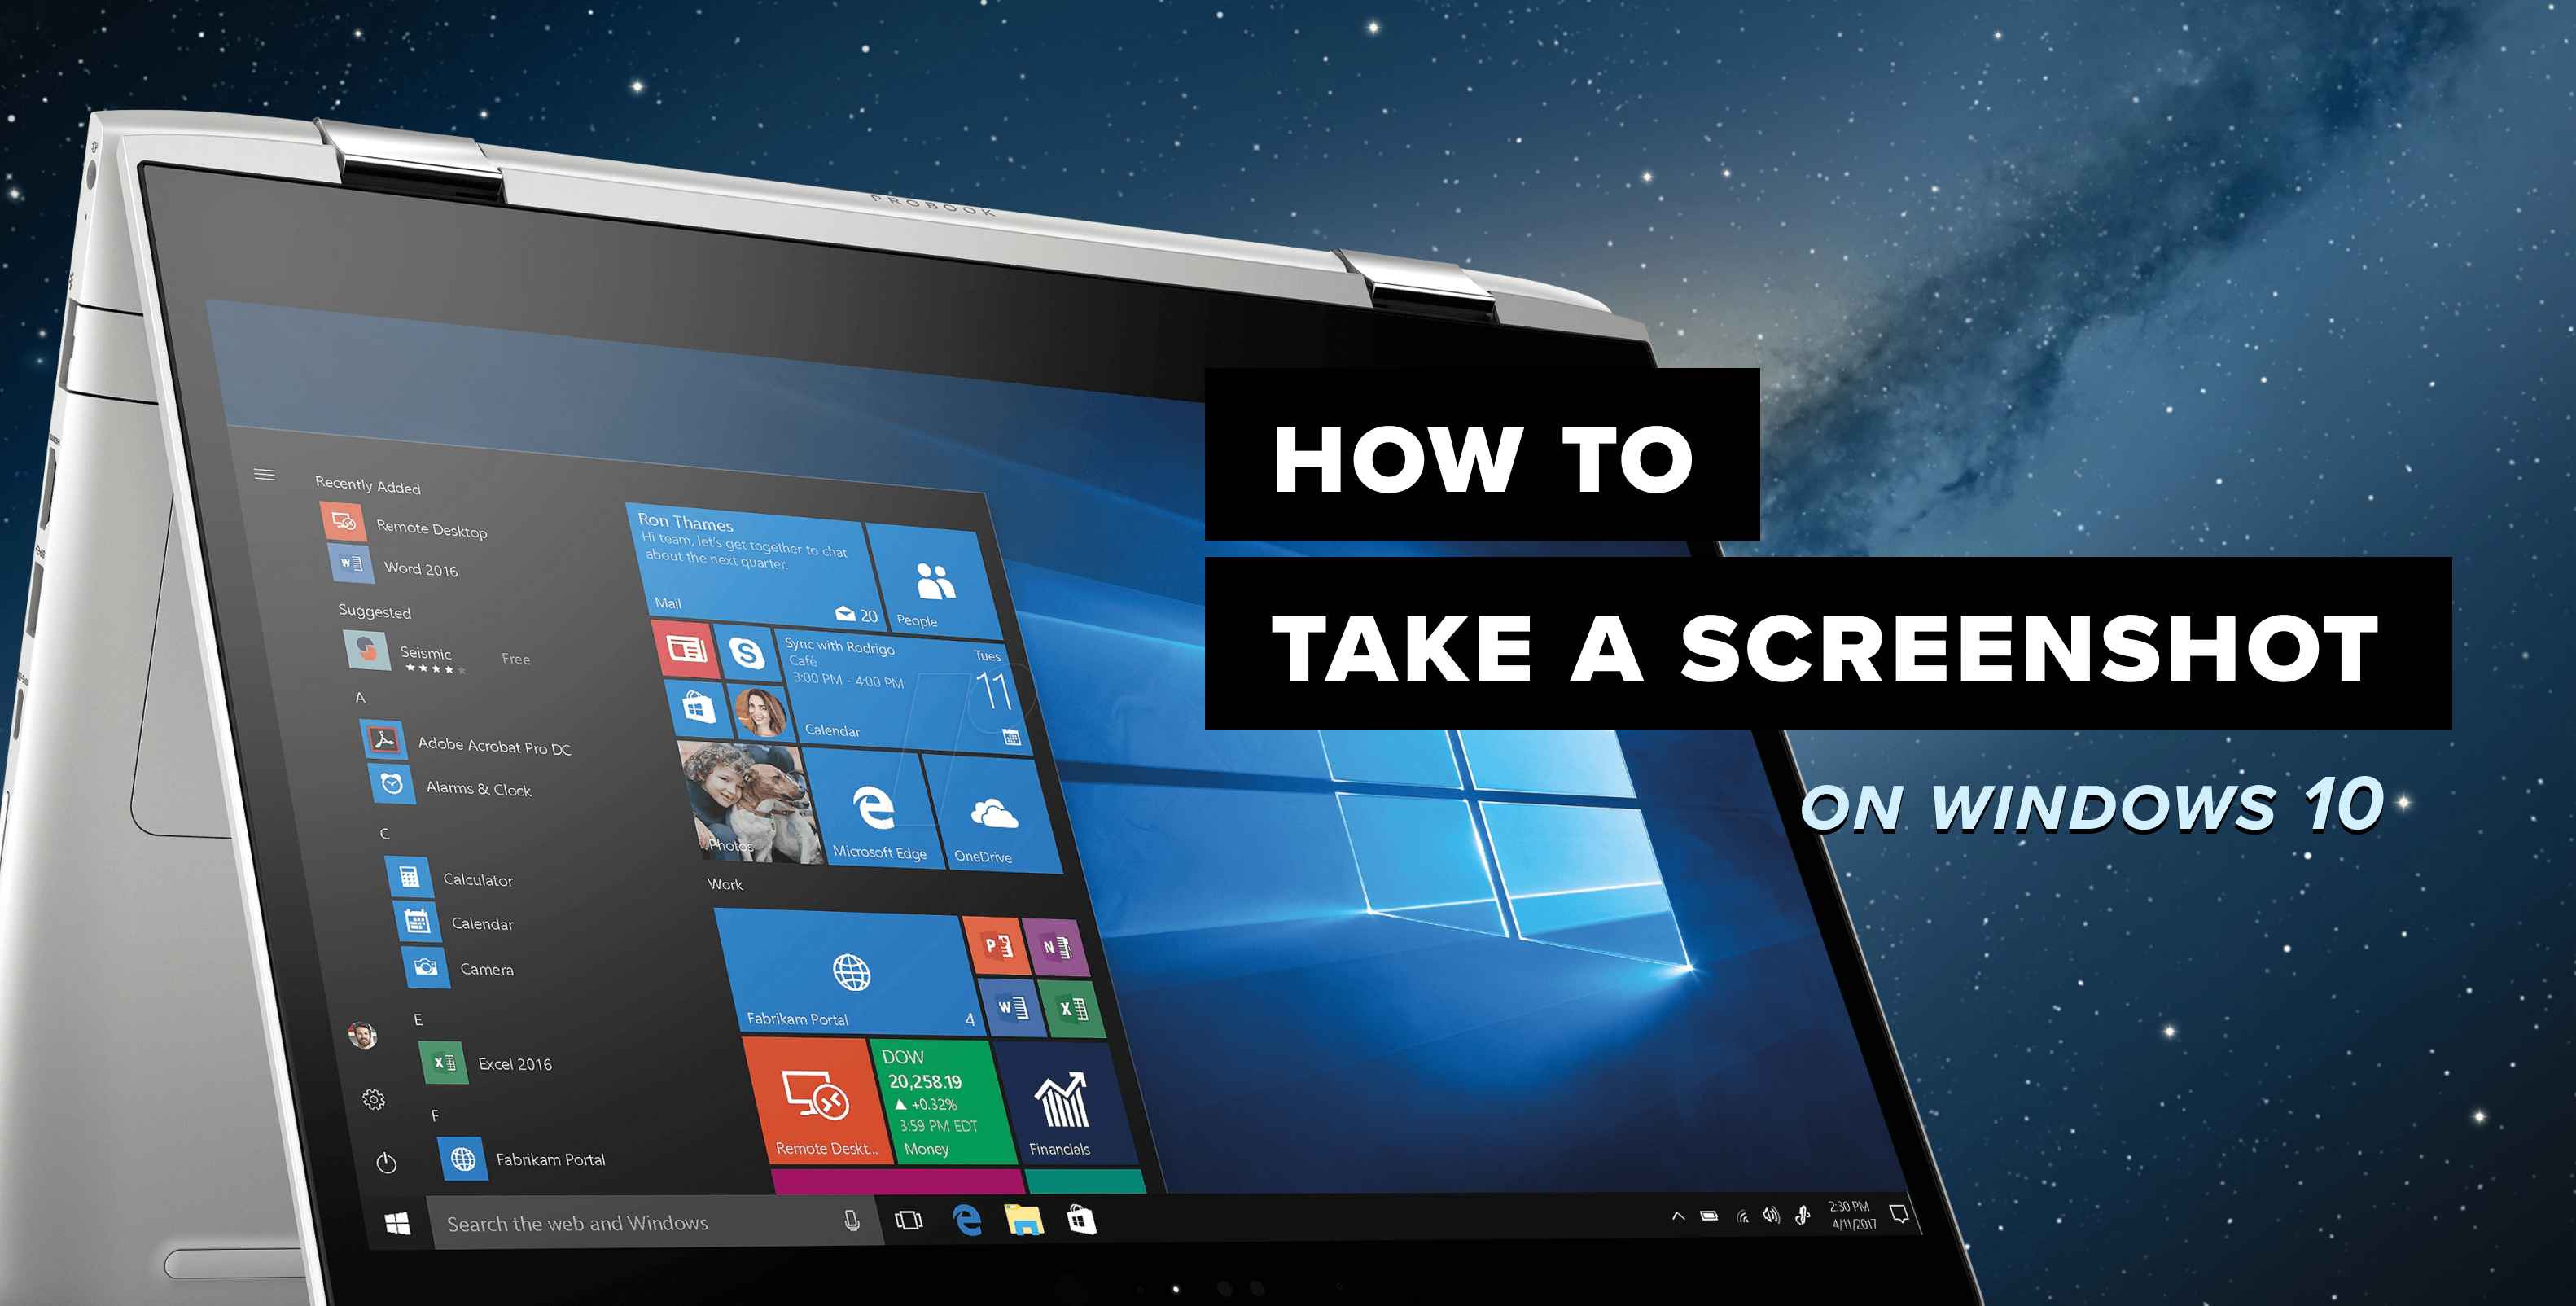 4 Easy Methods of How to Take a Screenshot on Windows 10